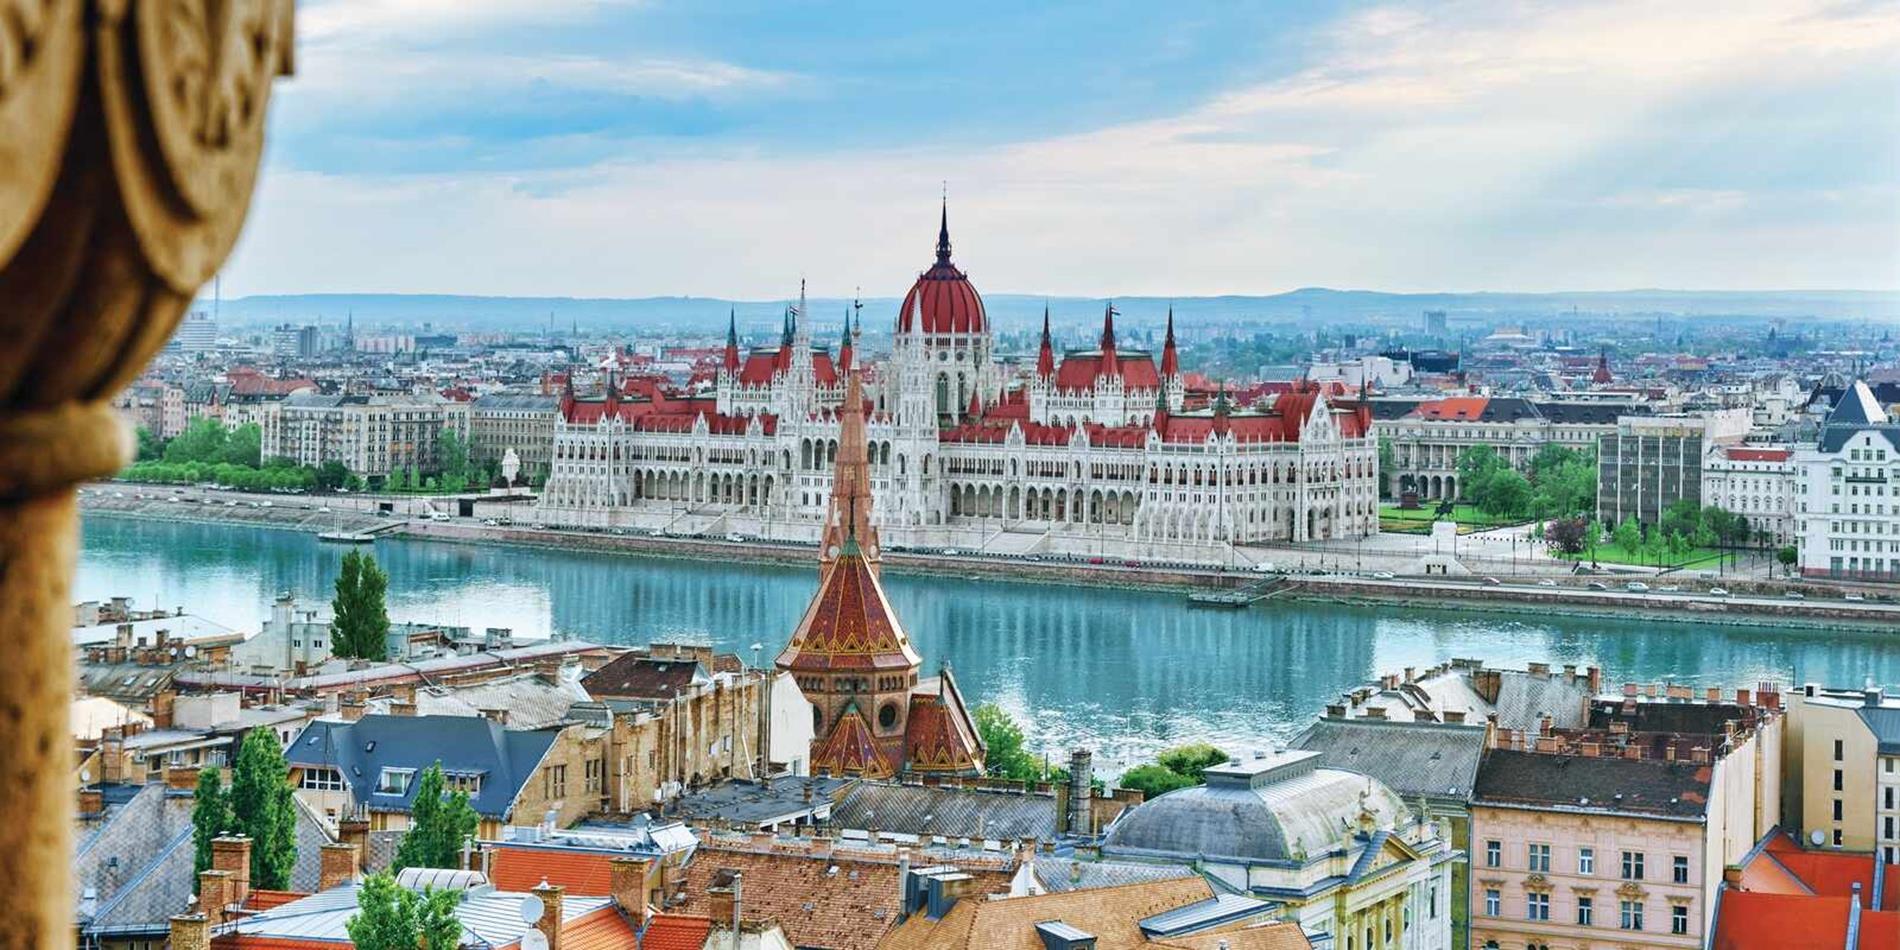 View of the Hungarian Parliament Building on the Danube River, Budapest